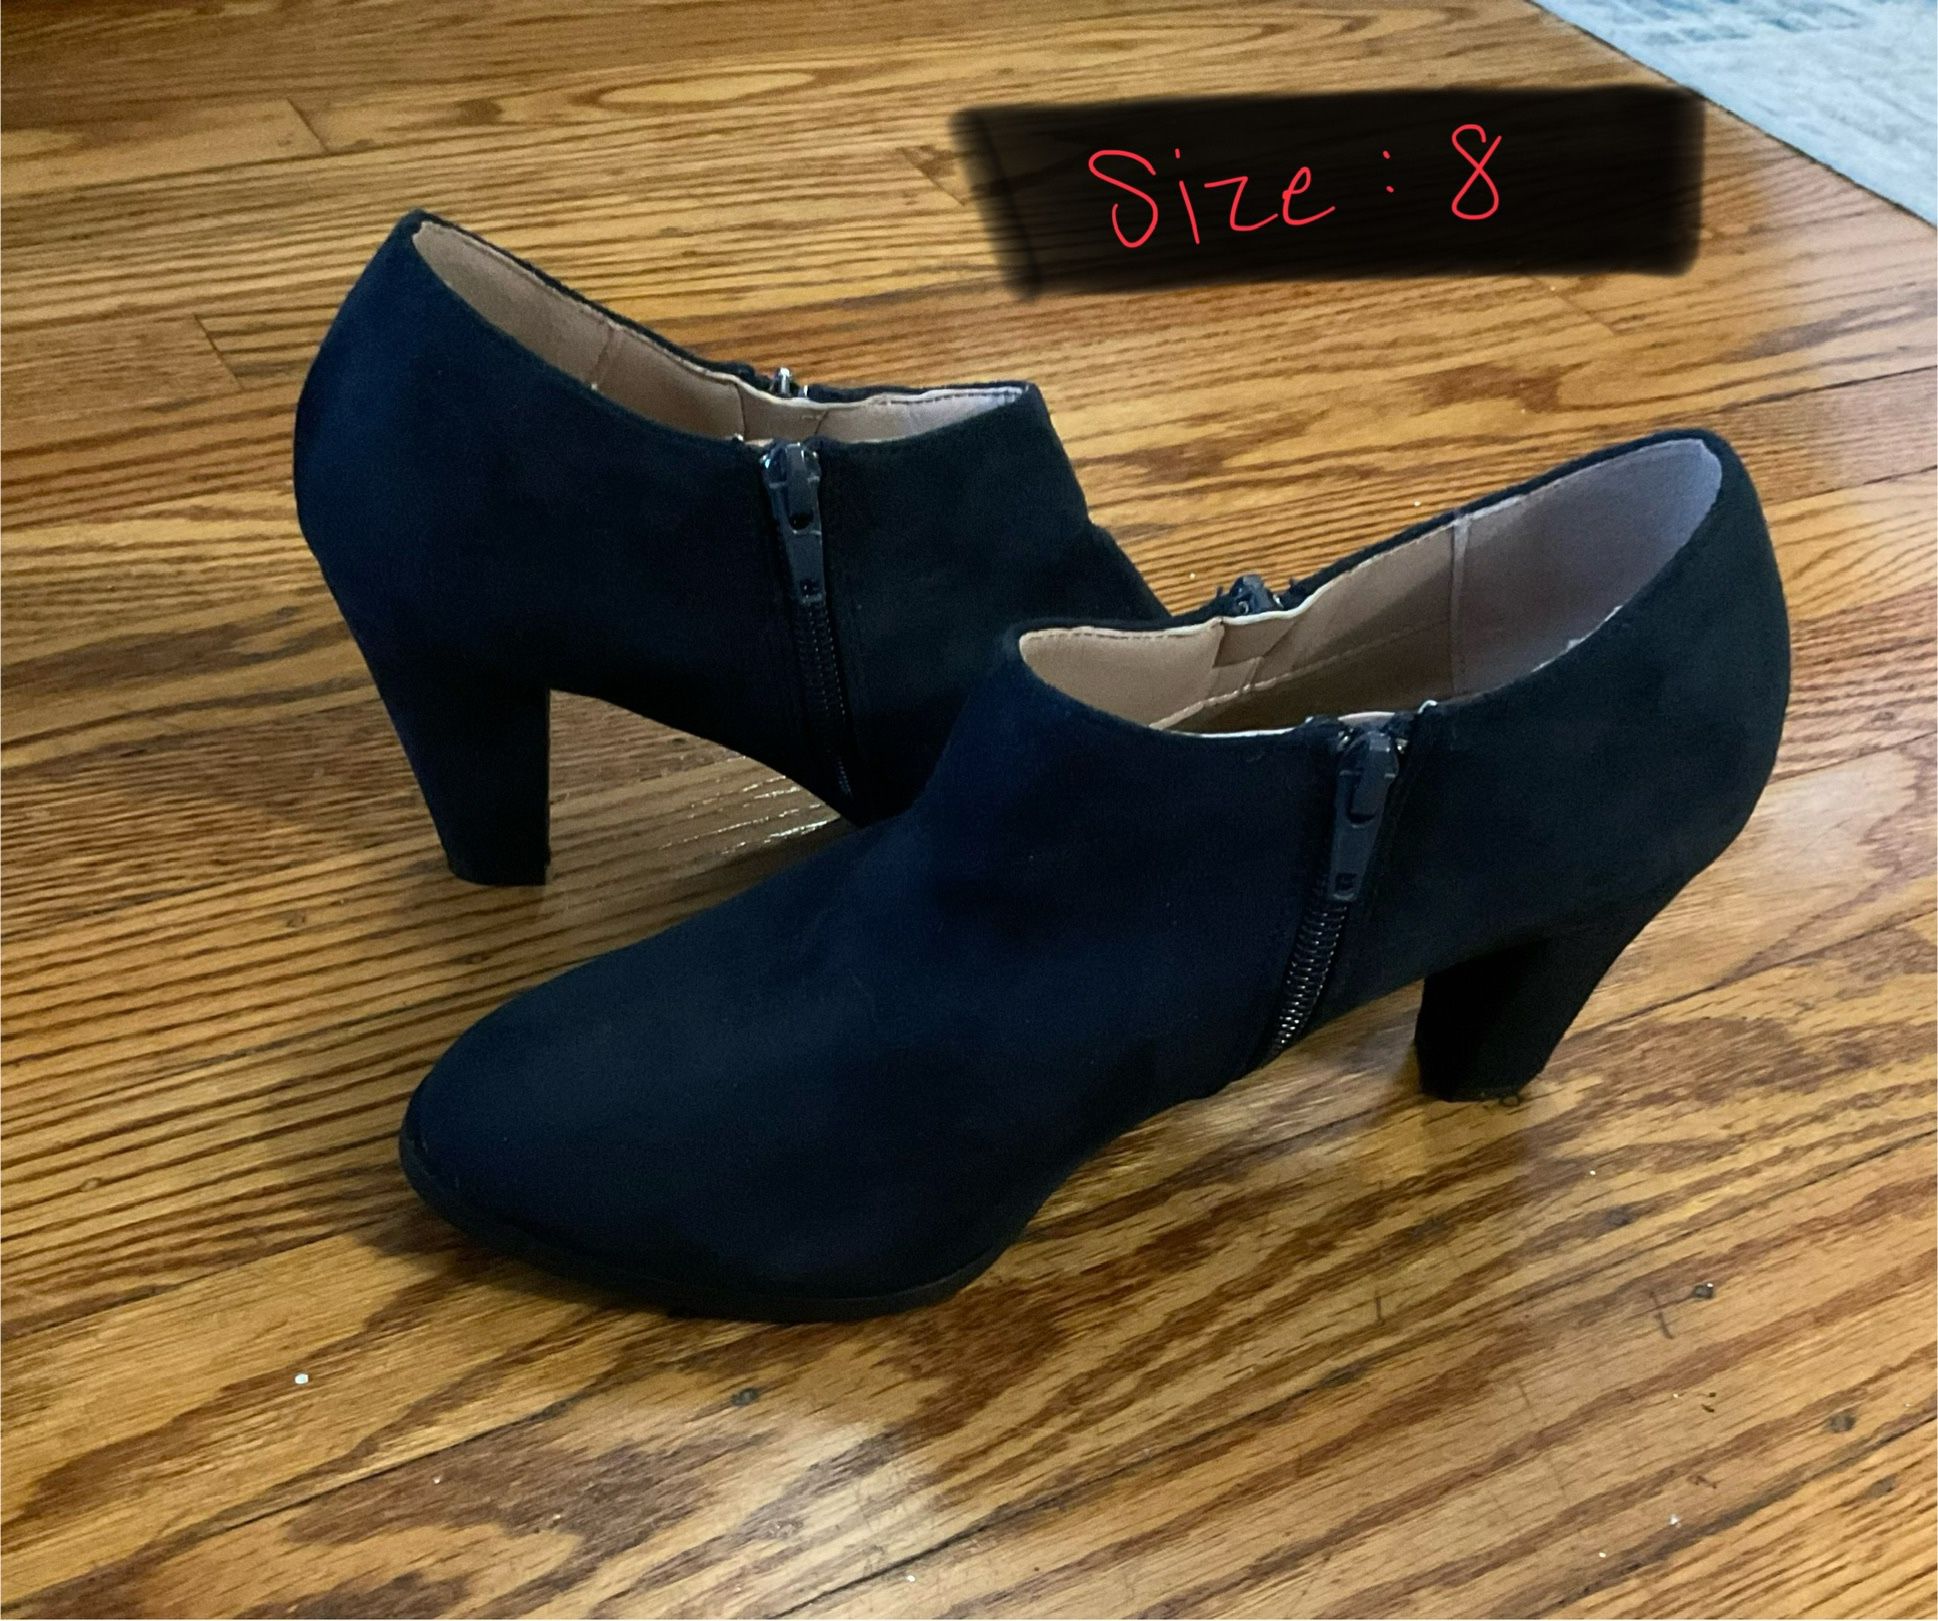 Black Suede Booties size 8 